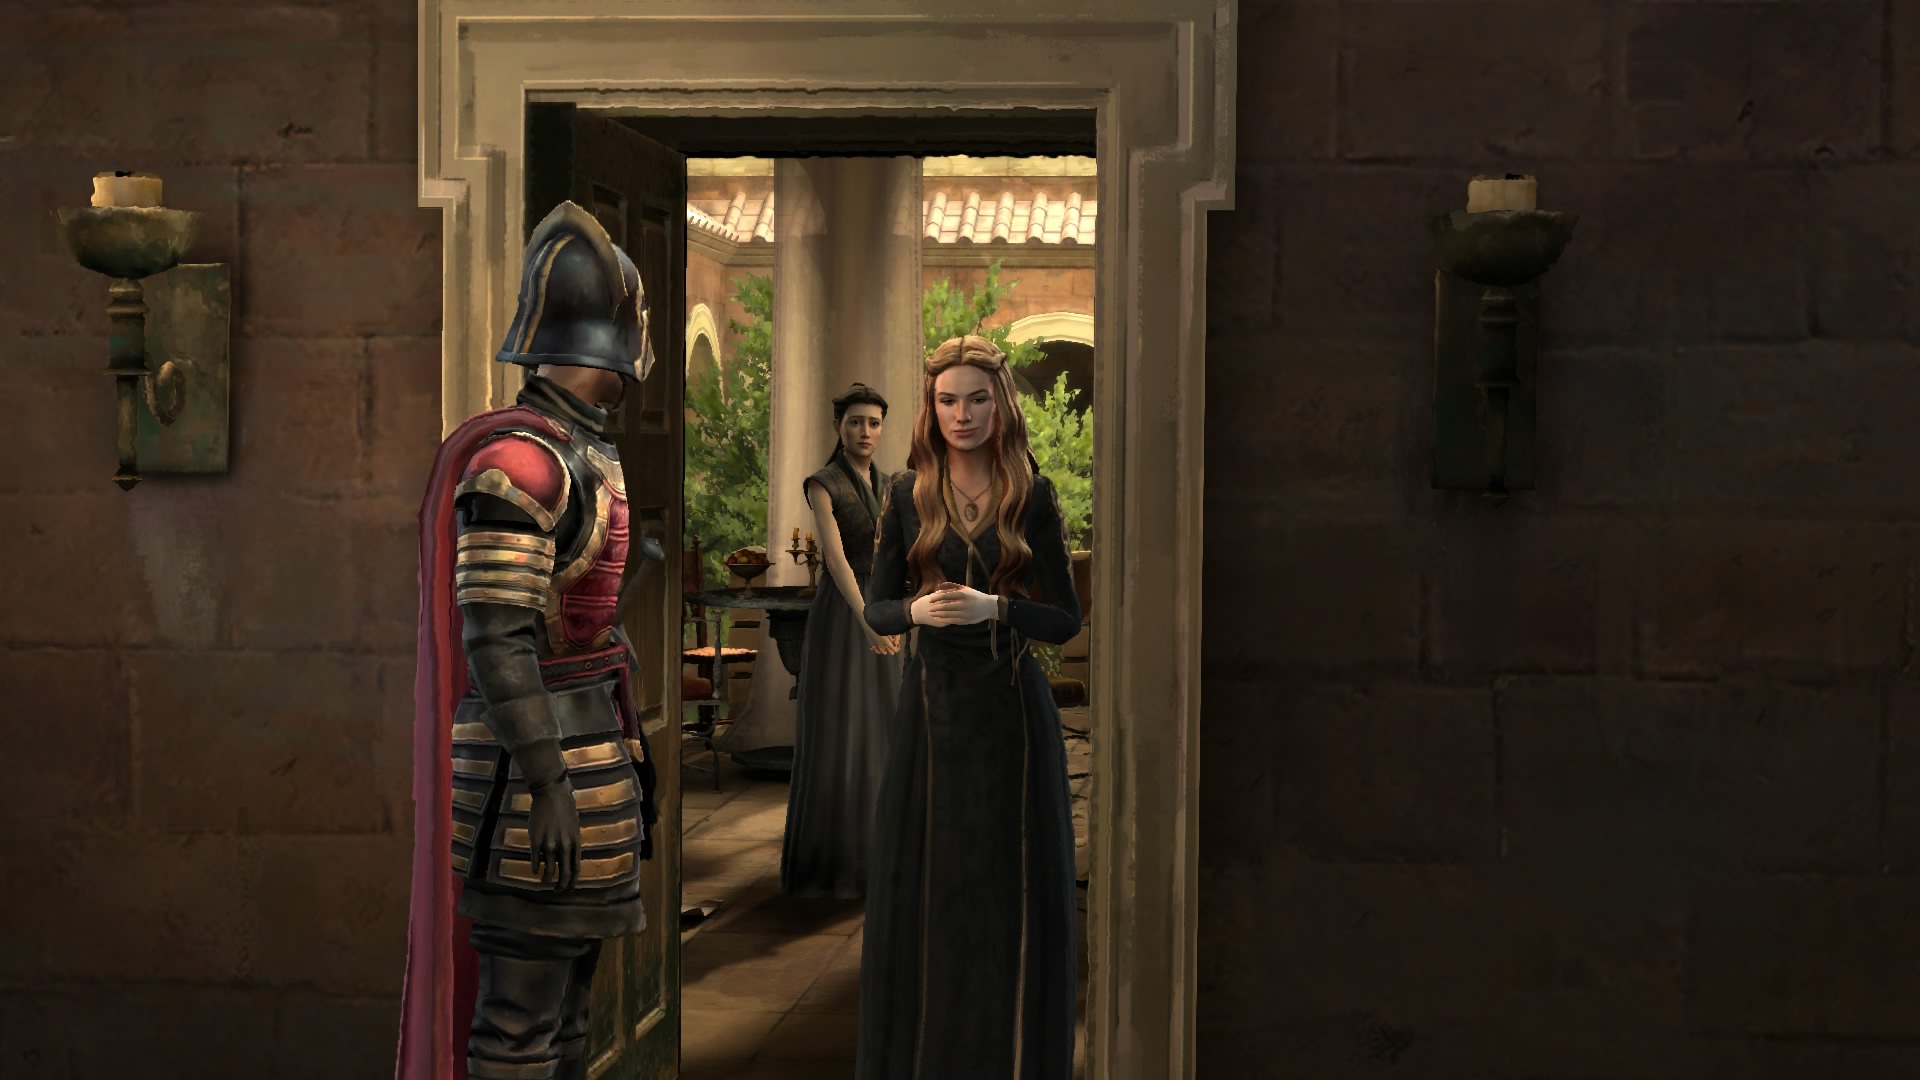 Game of Thrones: Episode 5 - A Nest of Vipers Screenshots